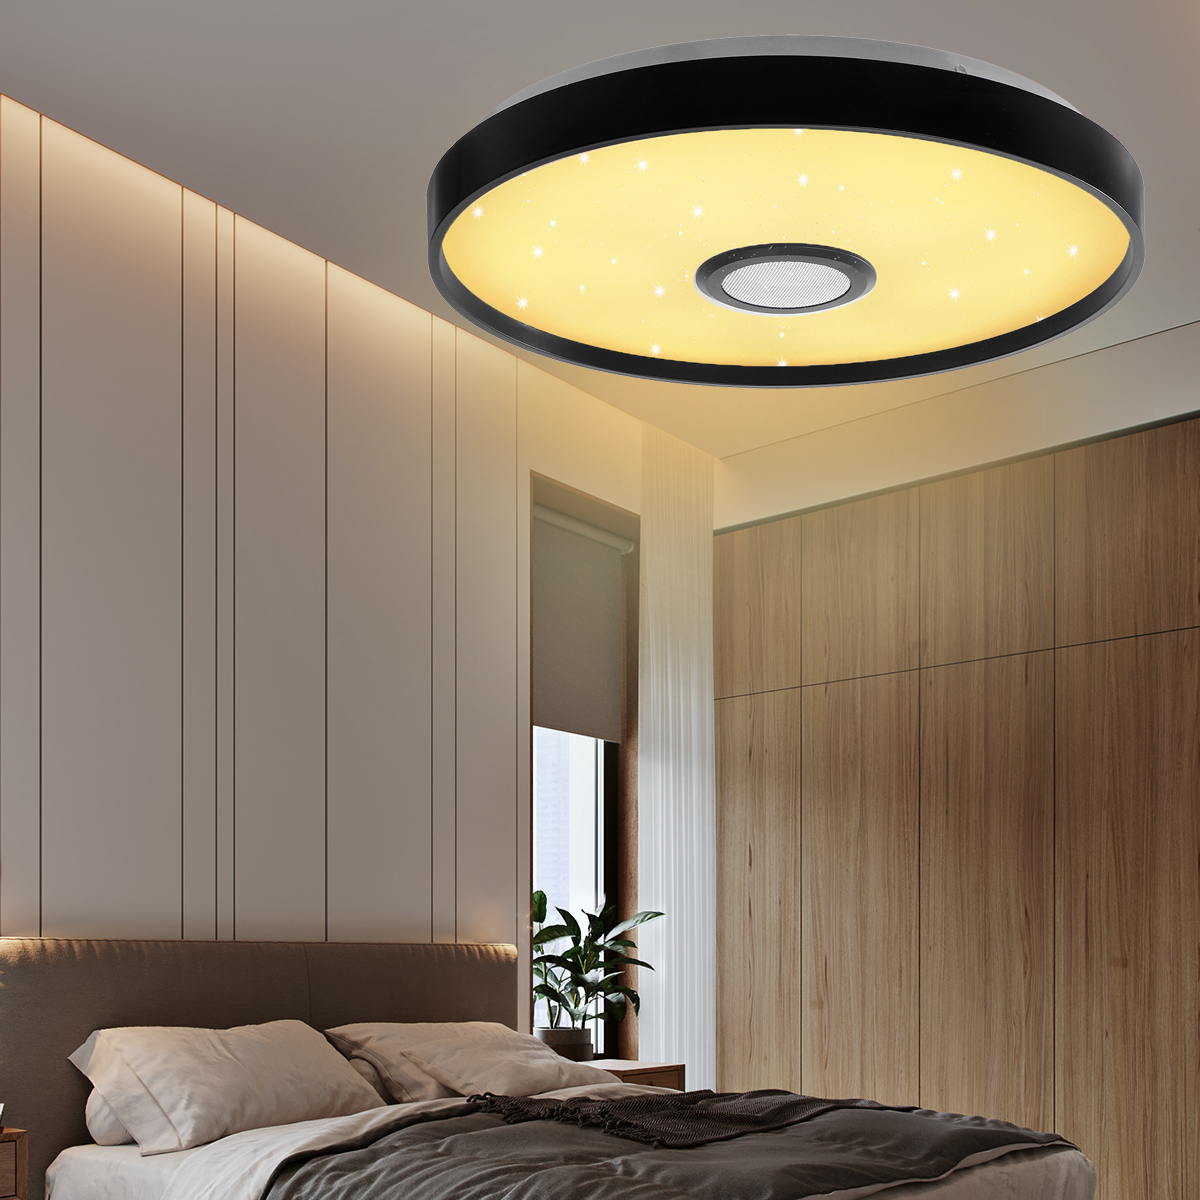 Dimmable-36W-RGB-LED-Ceiling-Light-Lamp-bluetooth-WIFI-Alexa--Google-Home--Remote-1758787-5